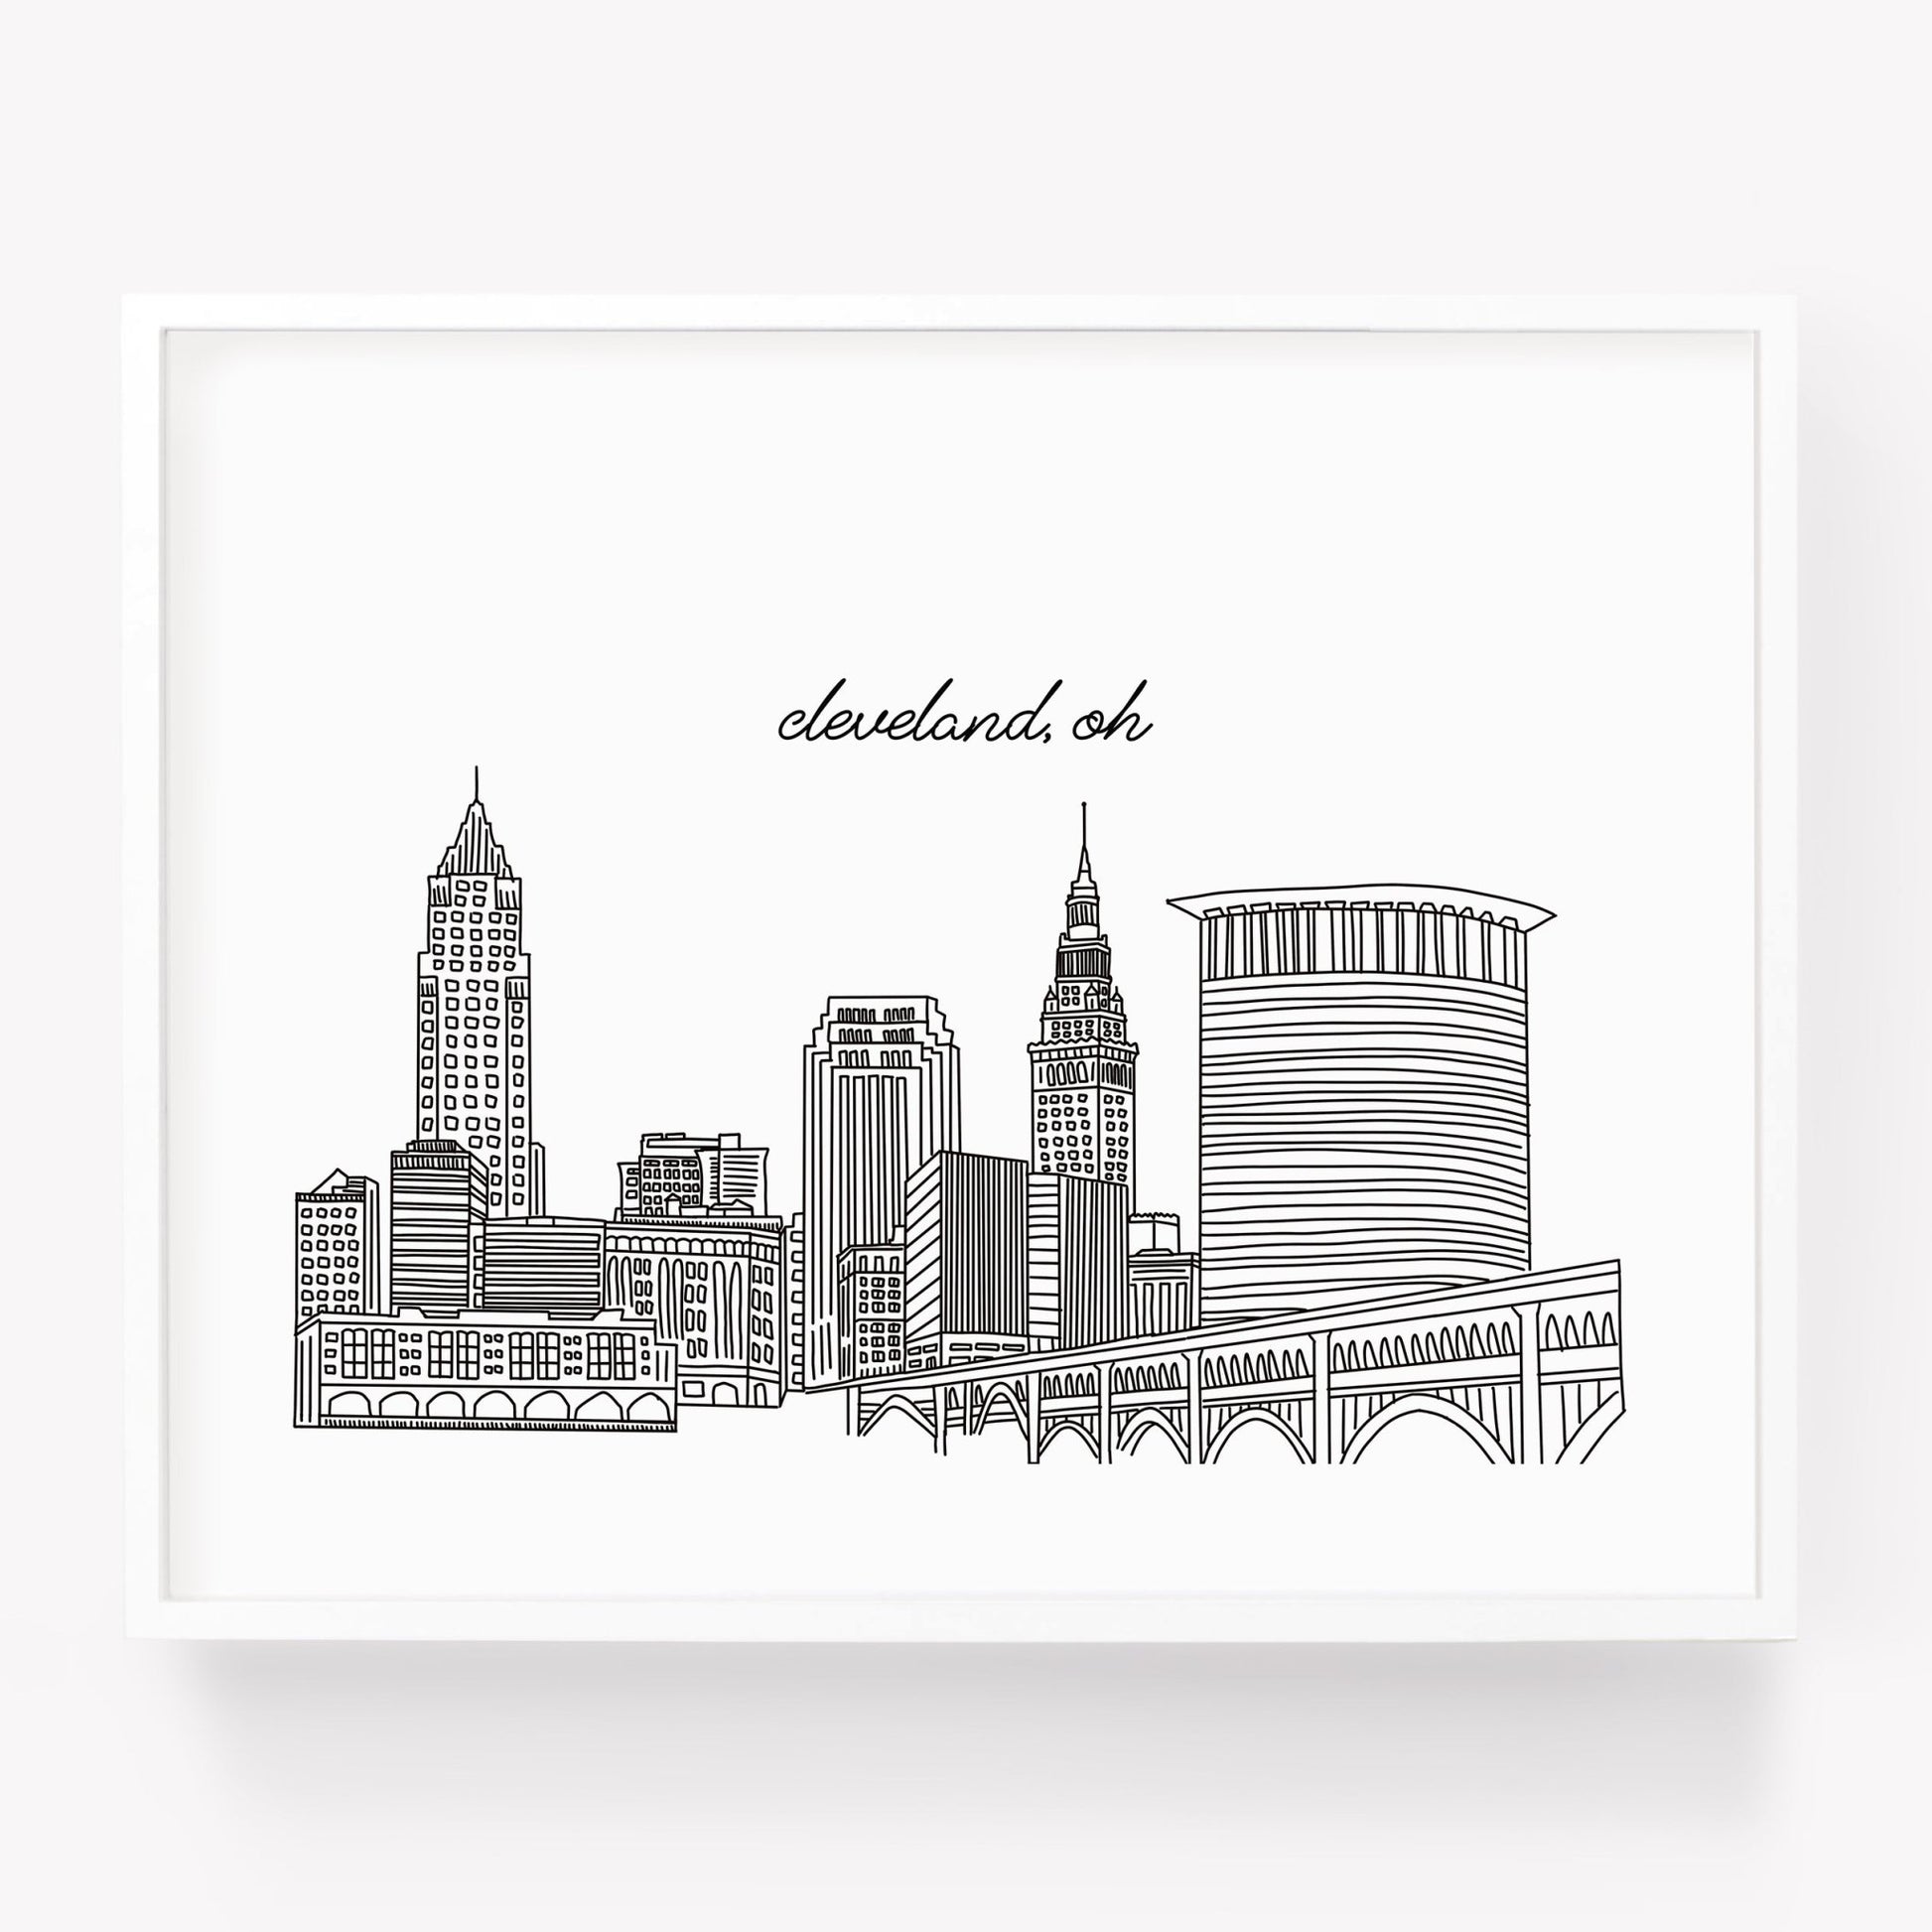 A city art print of a skyline drawing of Cleveland Ohio - Sparks House Co